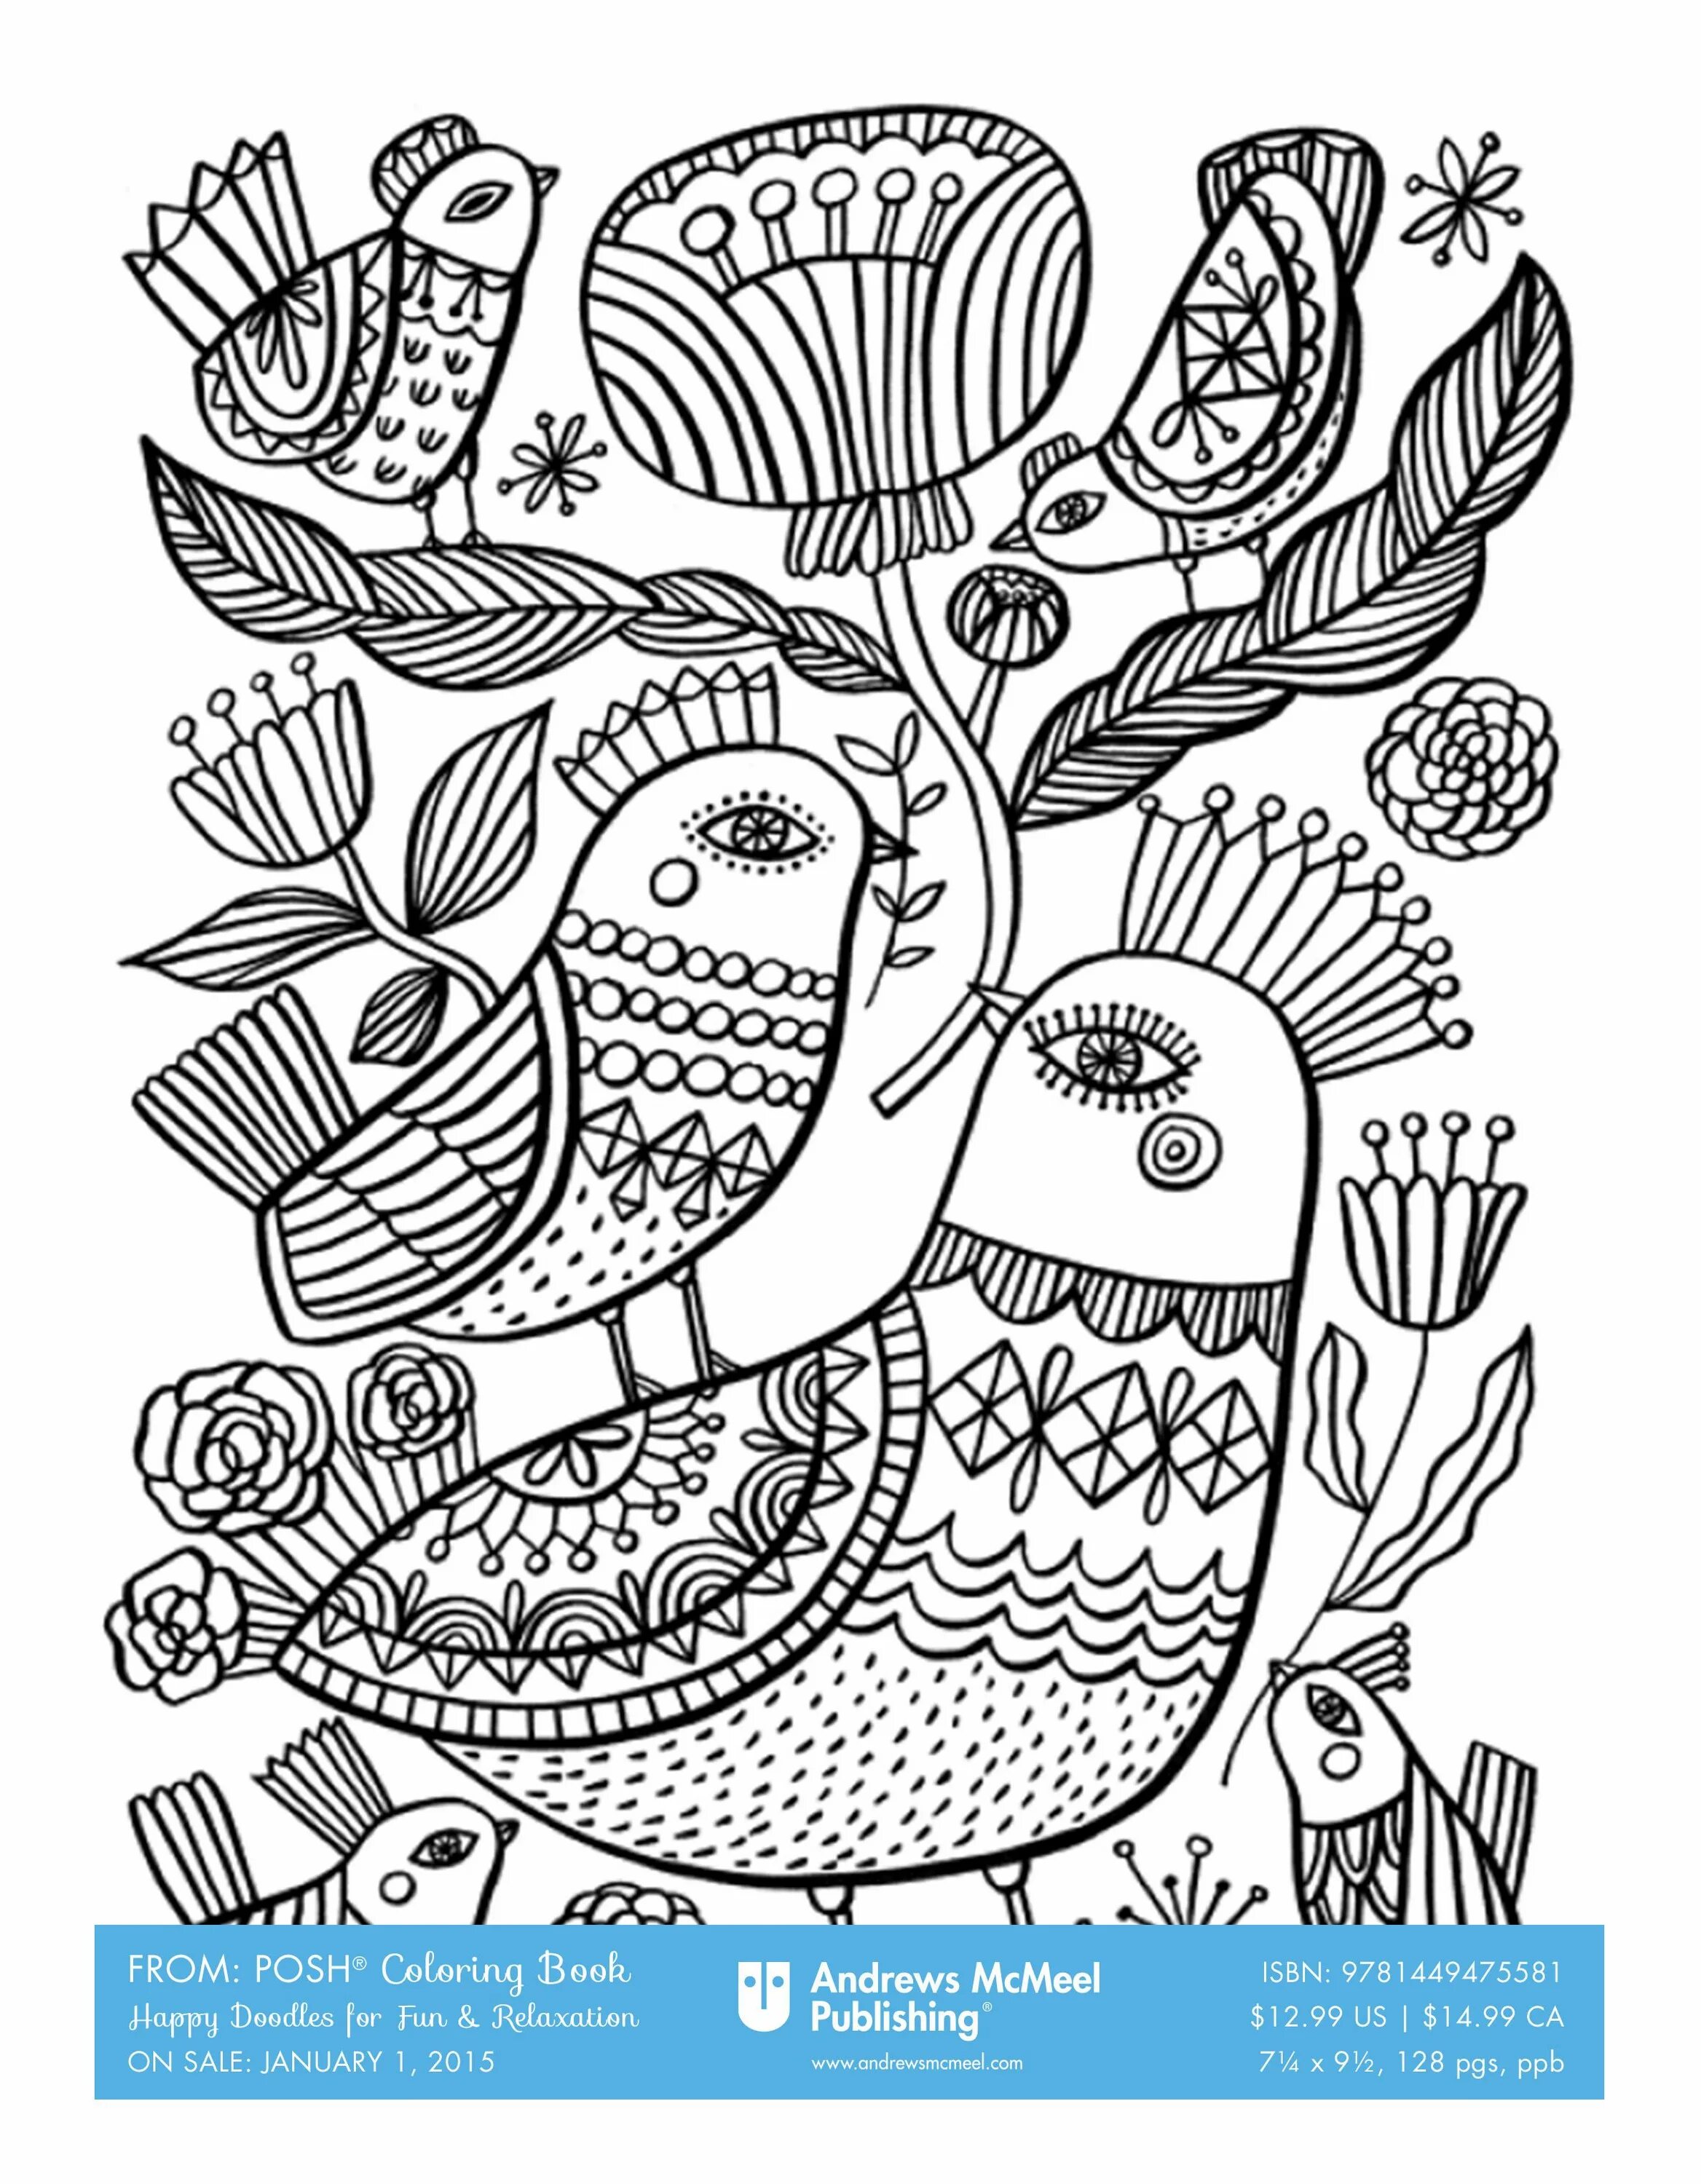 Great relaxation coloring book for kids